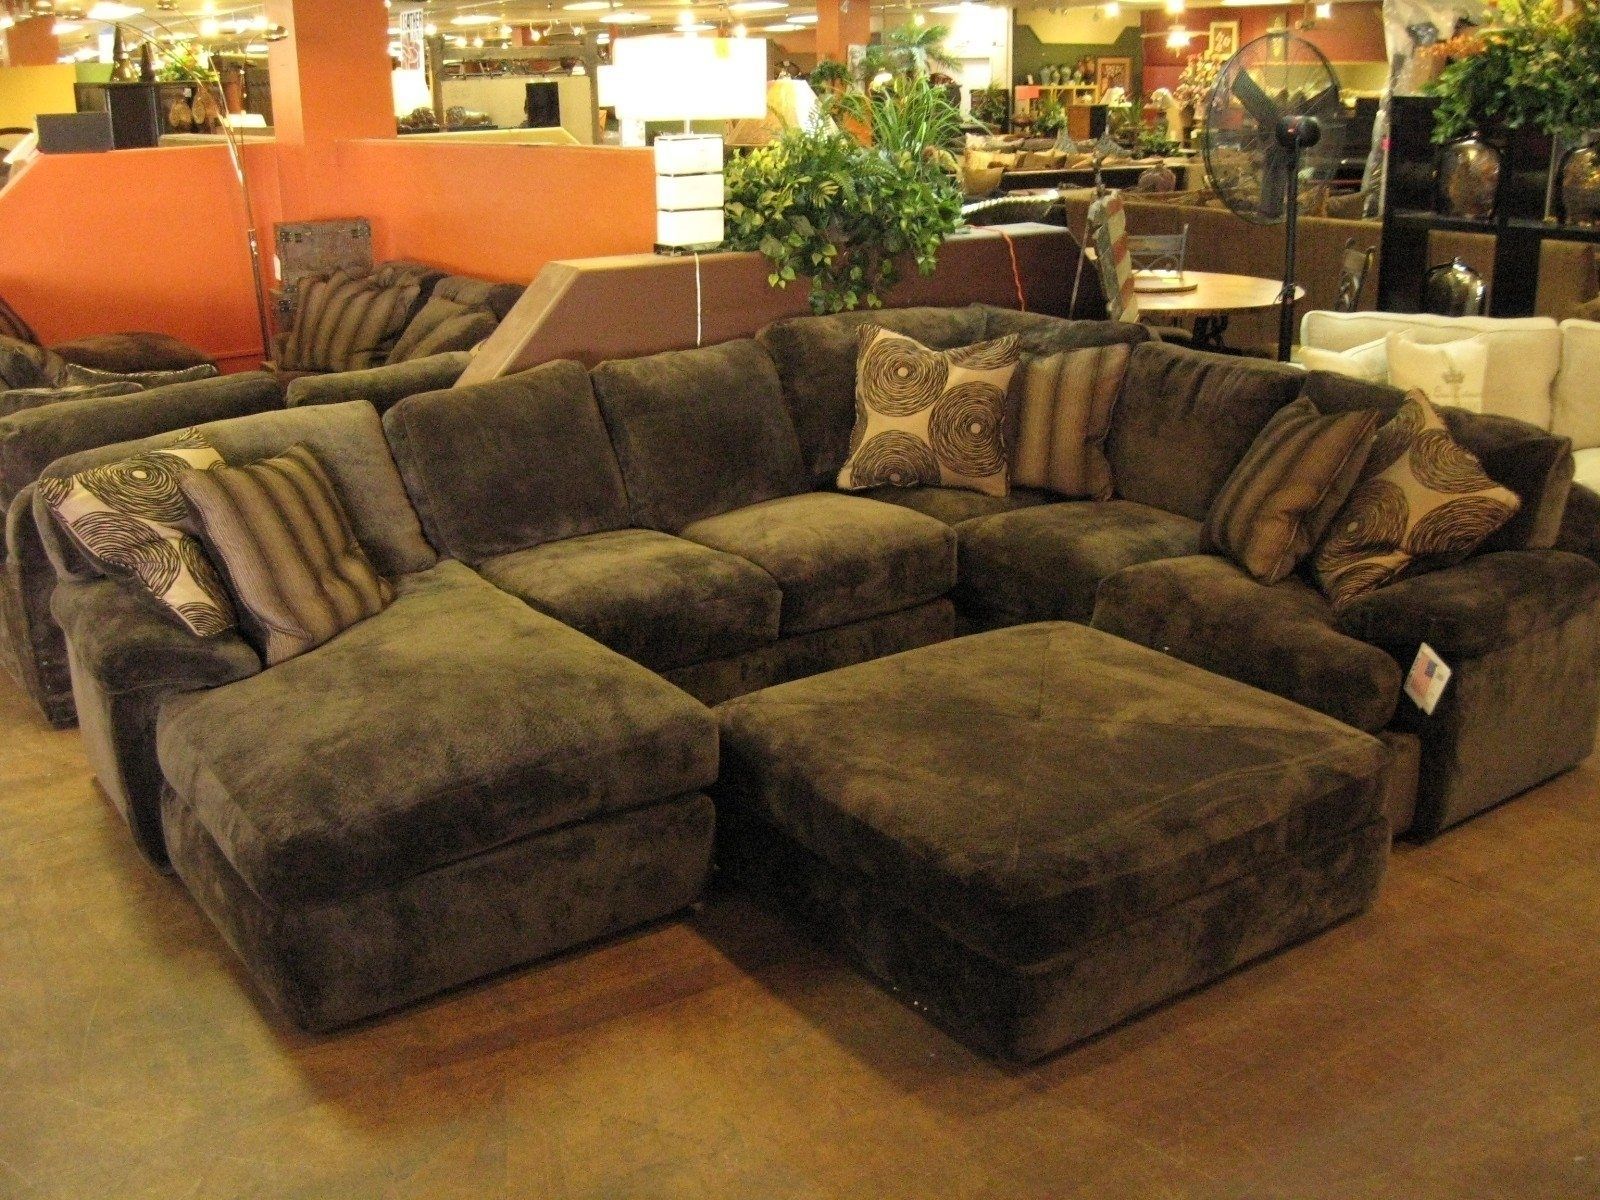 Stylish Sectional Sofa With Oversized Ottoman – Mediasupload Regarding Sectionals With Chaise And Ottoman (View 1 of 10)